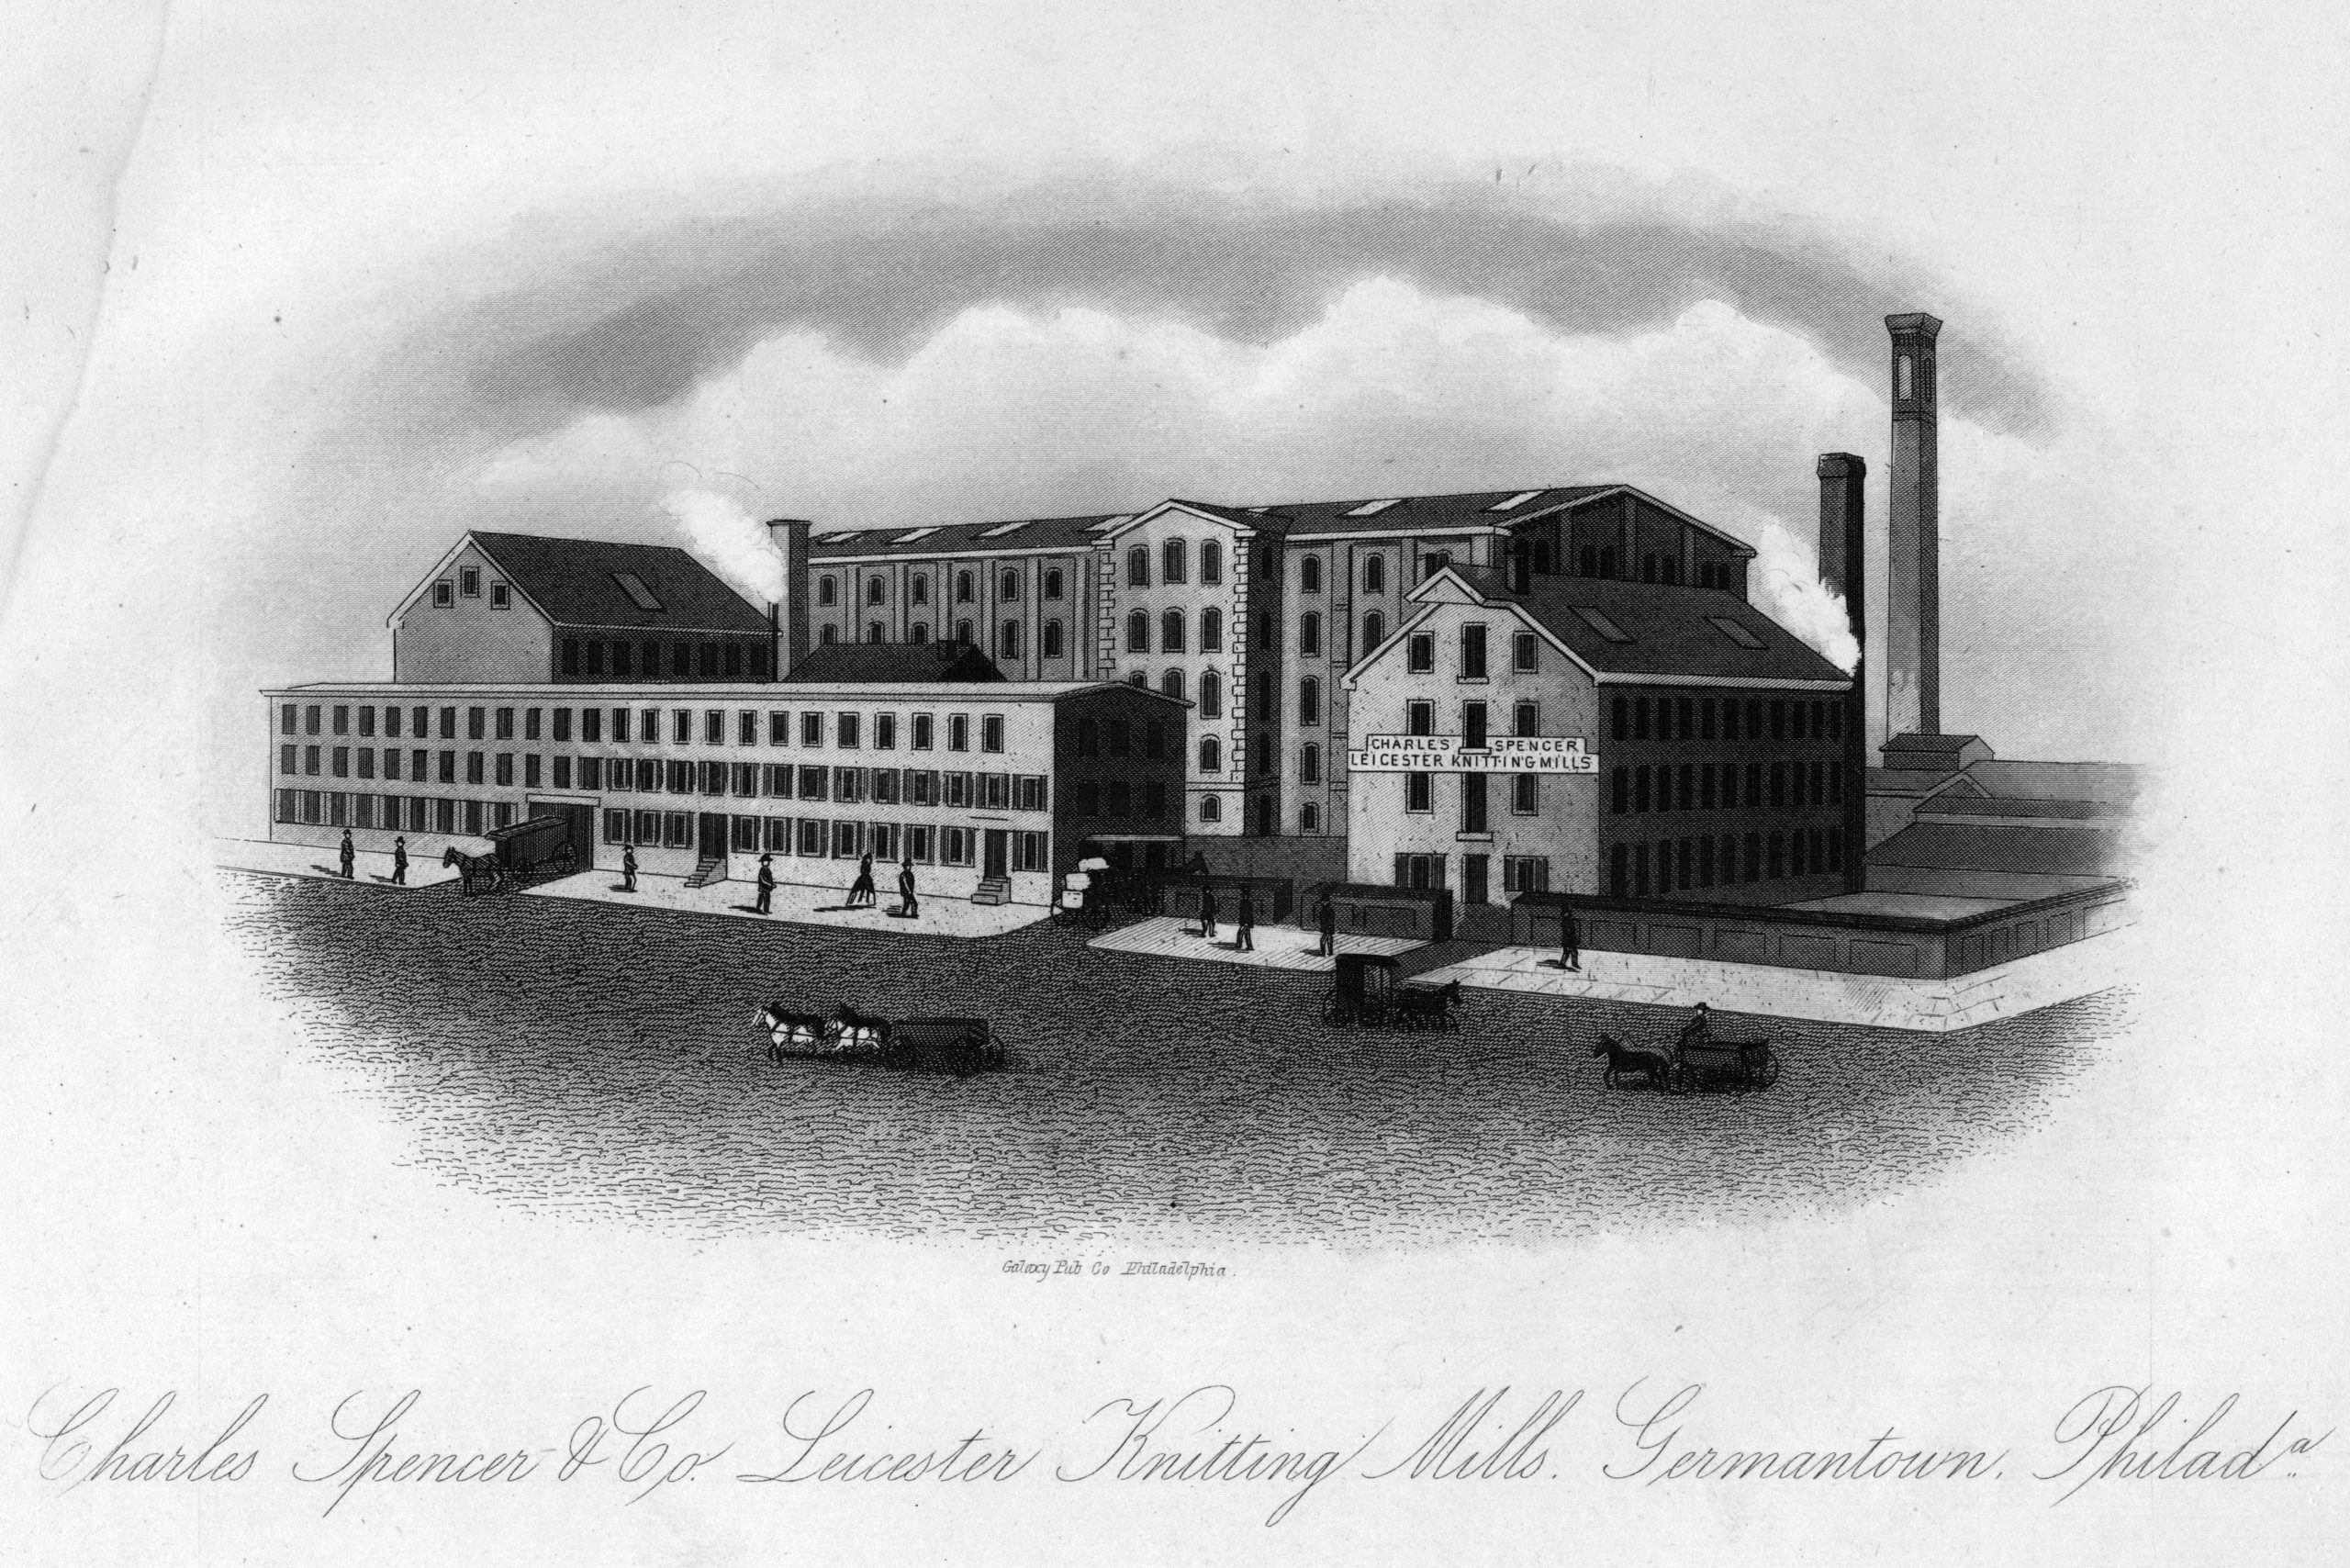 Leicester Knitting Mills, Charles Spencer & Co.